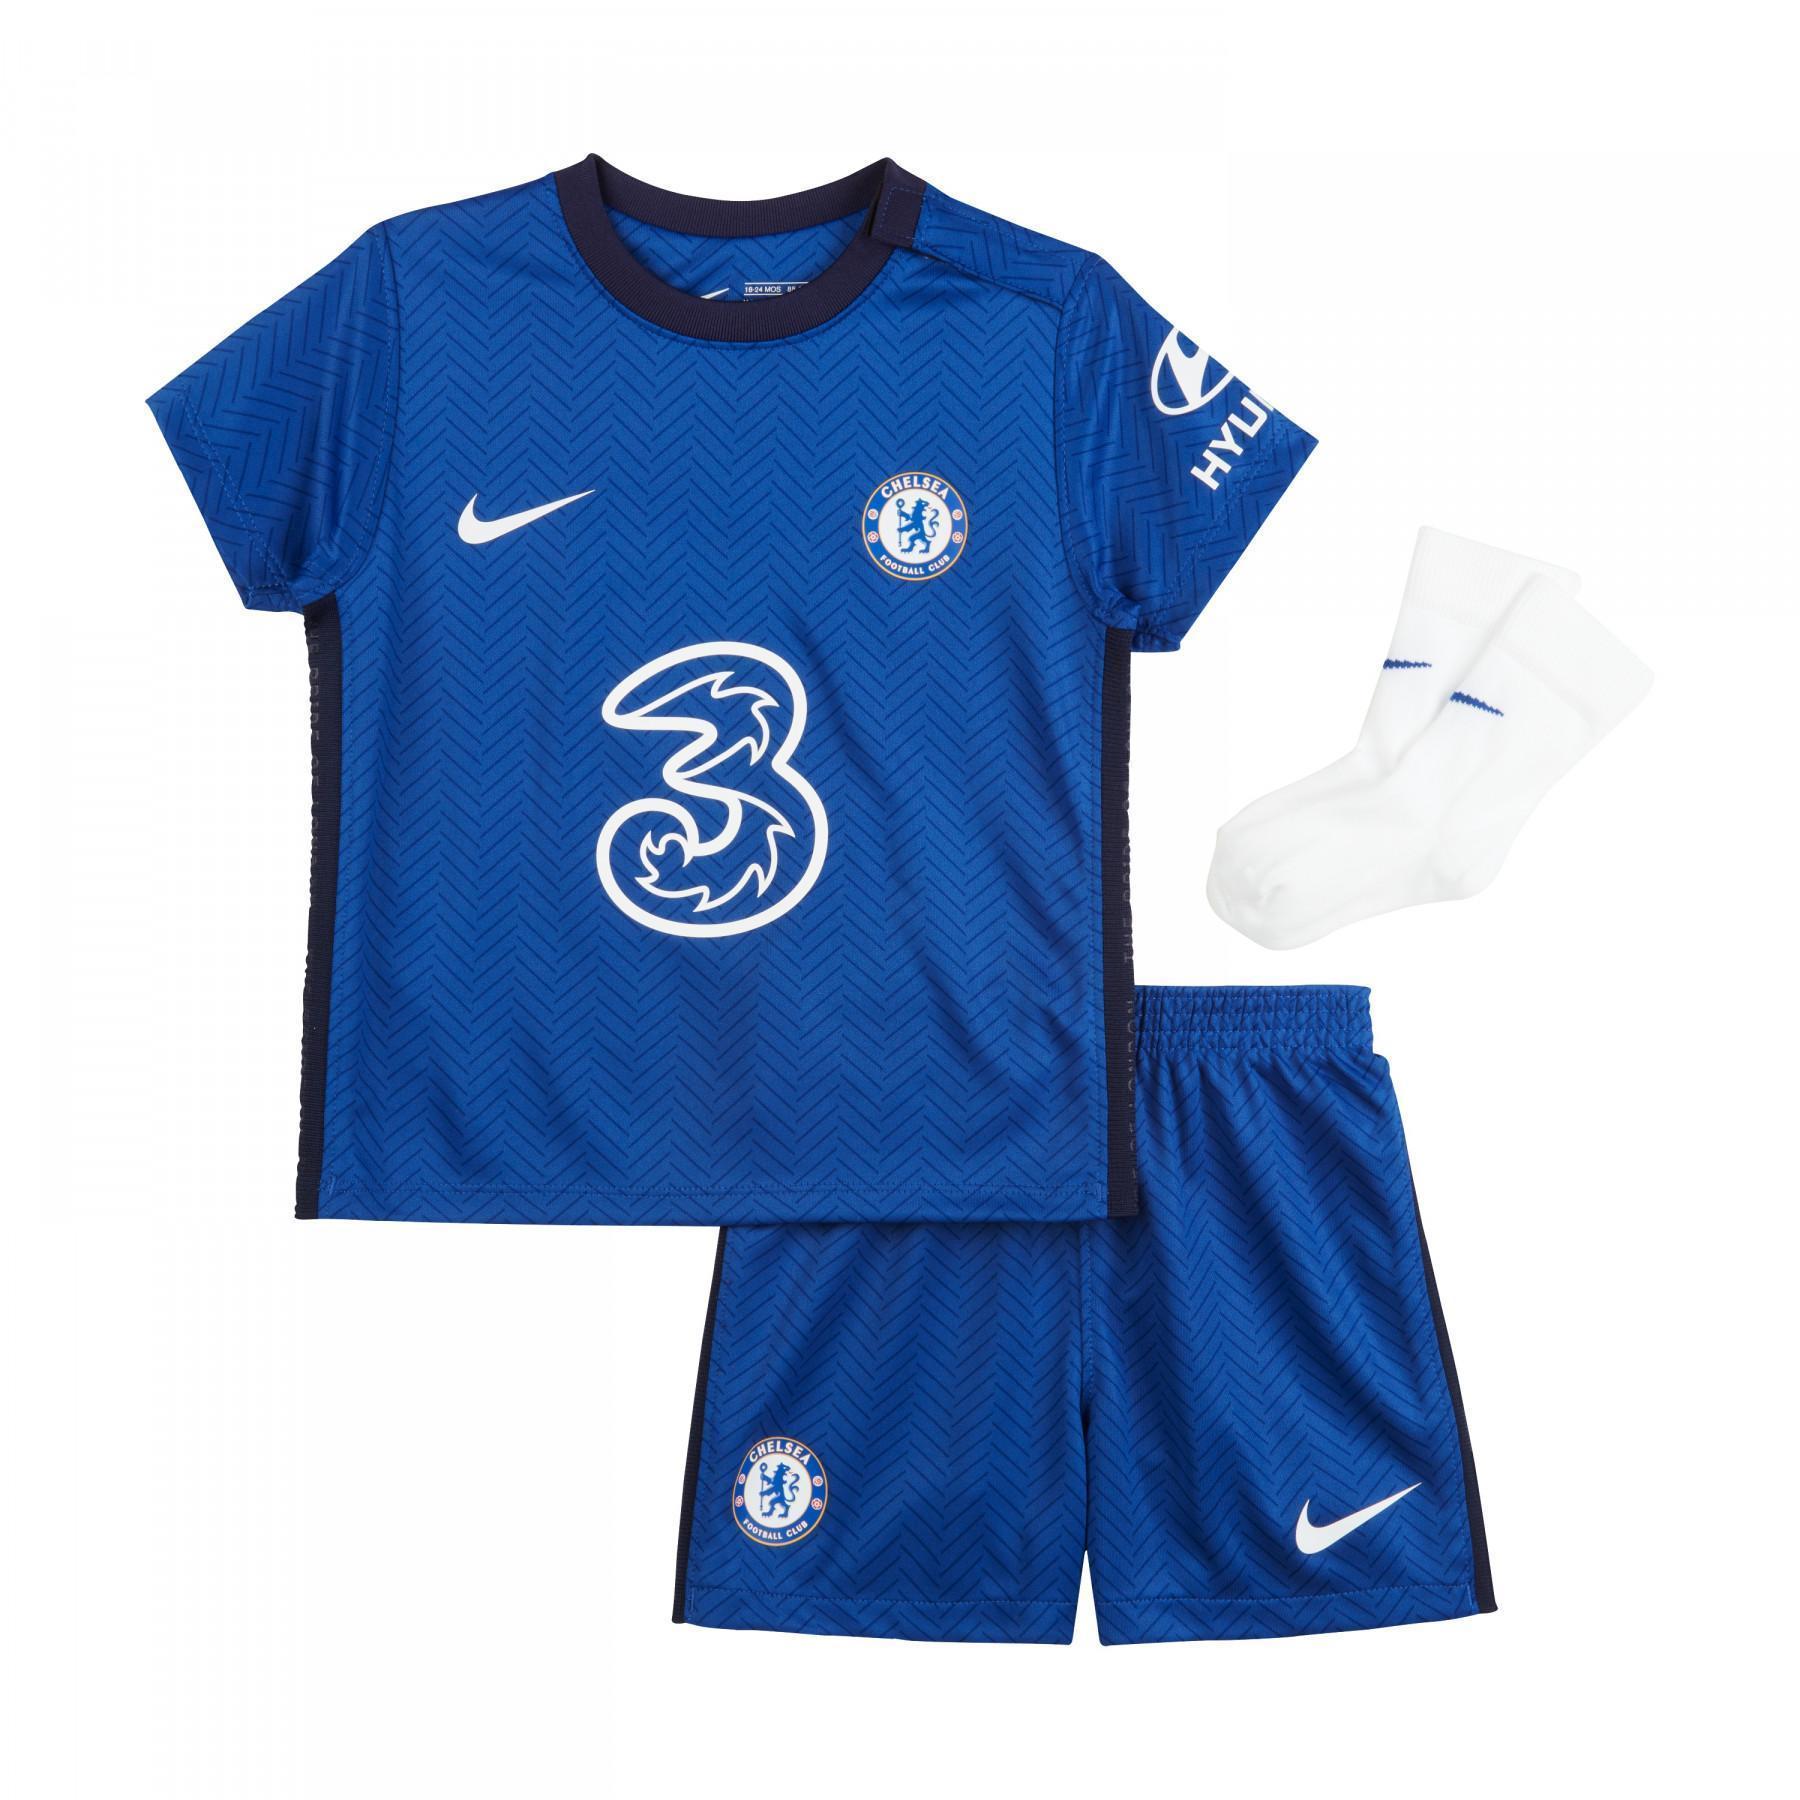 Mini baby kit at home Chelsea 2020/21